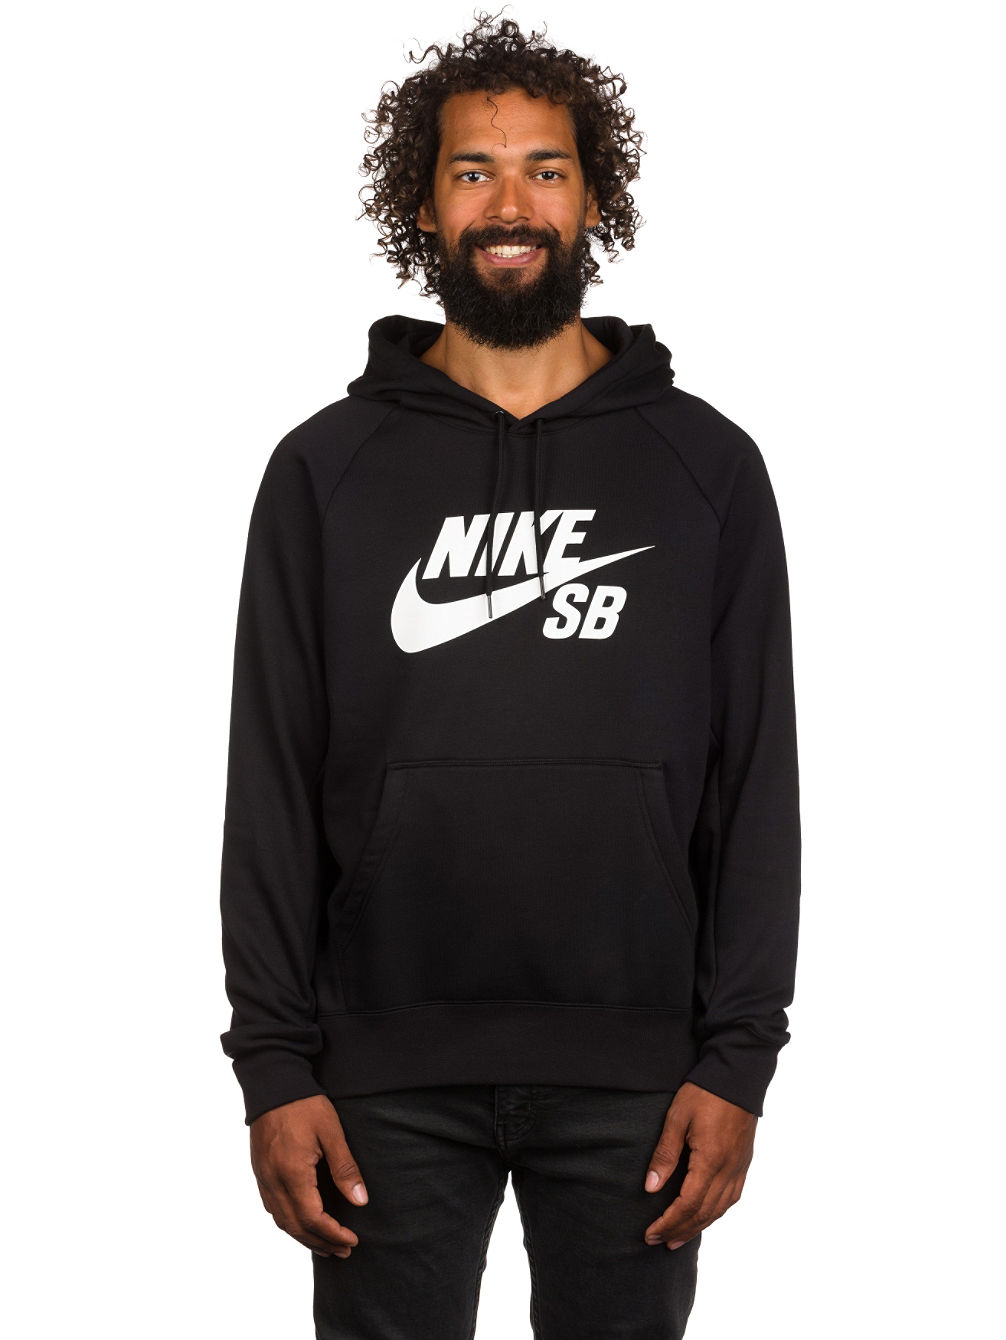 Buy Nike SB Icon Pullover Hoodie online at blue-tomato.com